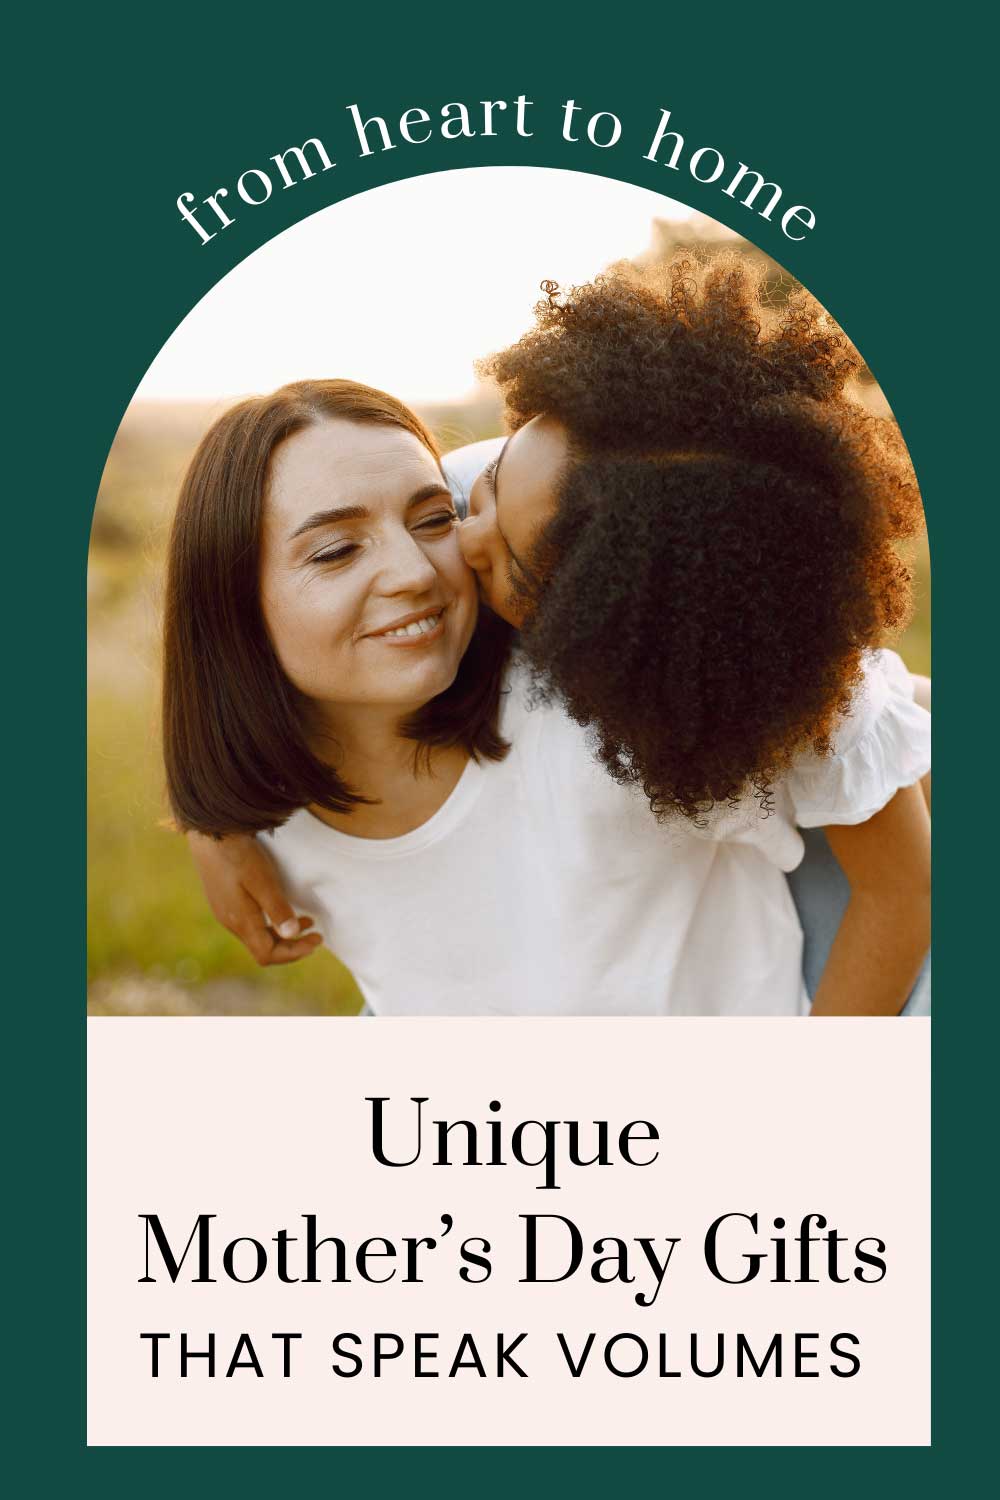 From Heart to Home: Unique Mother's Day Gifts That Speak Volumes